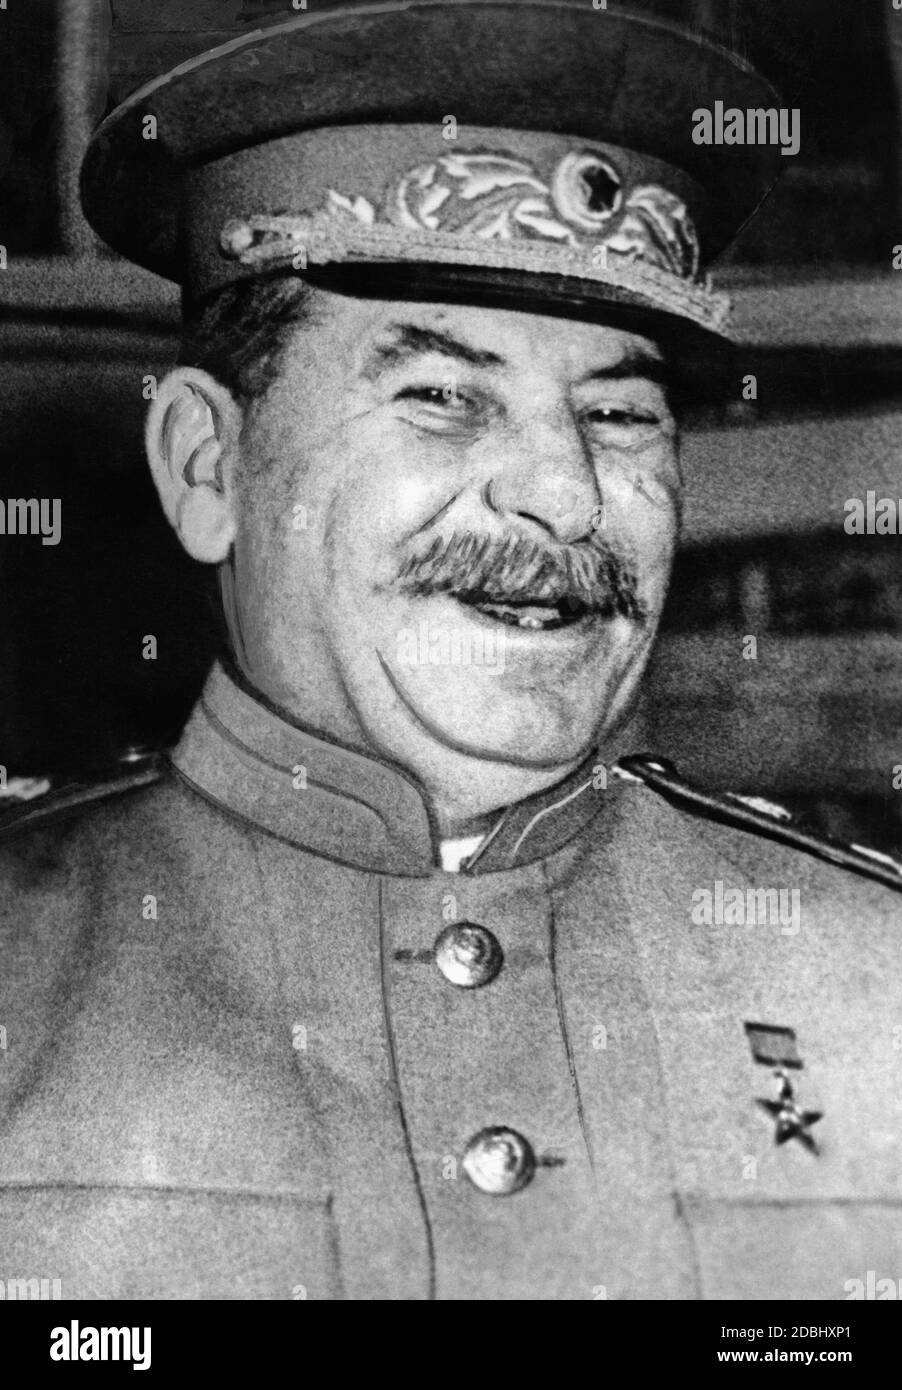 Ioseb Besarionis dz? Djugashvili, adopted name Stalin, dictator of the Soviet Union from 1927 to 1954. Photos of Stalin destined for publication were carefully selected and were intended to support the personality cult around him. The photograph was taken in 1943 at the end of the Tehran Conference. Stock Photo